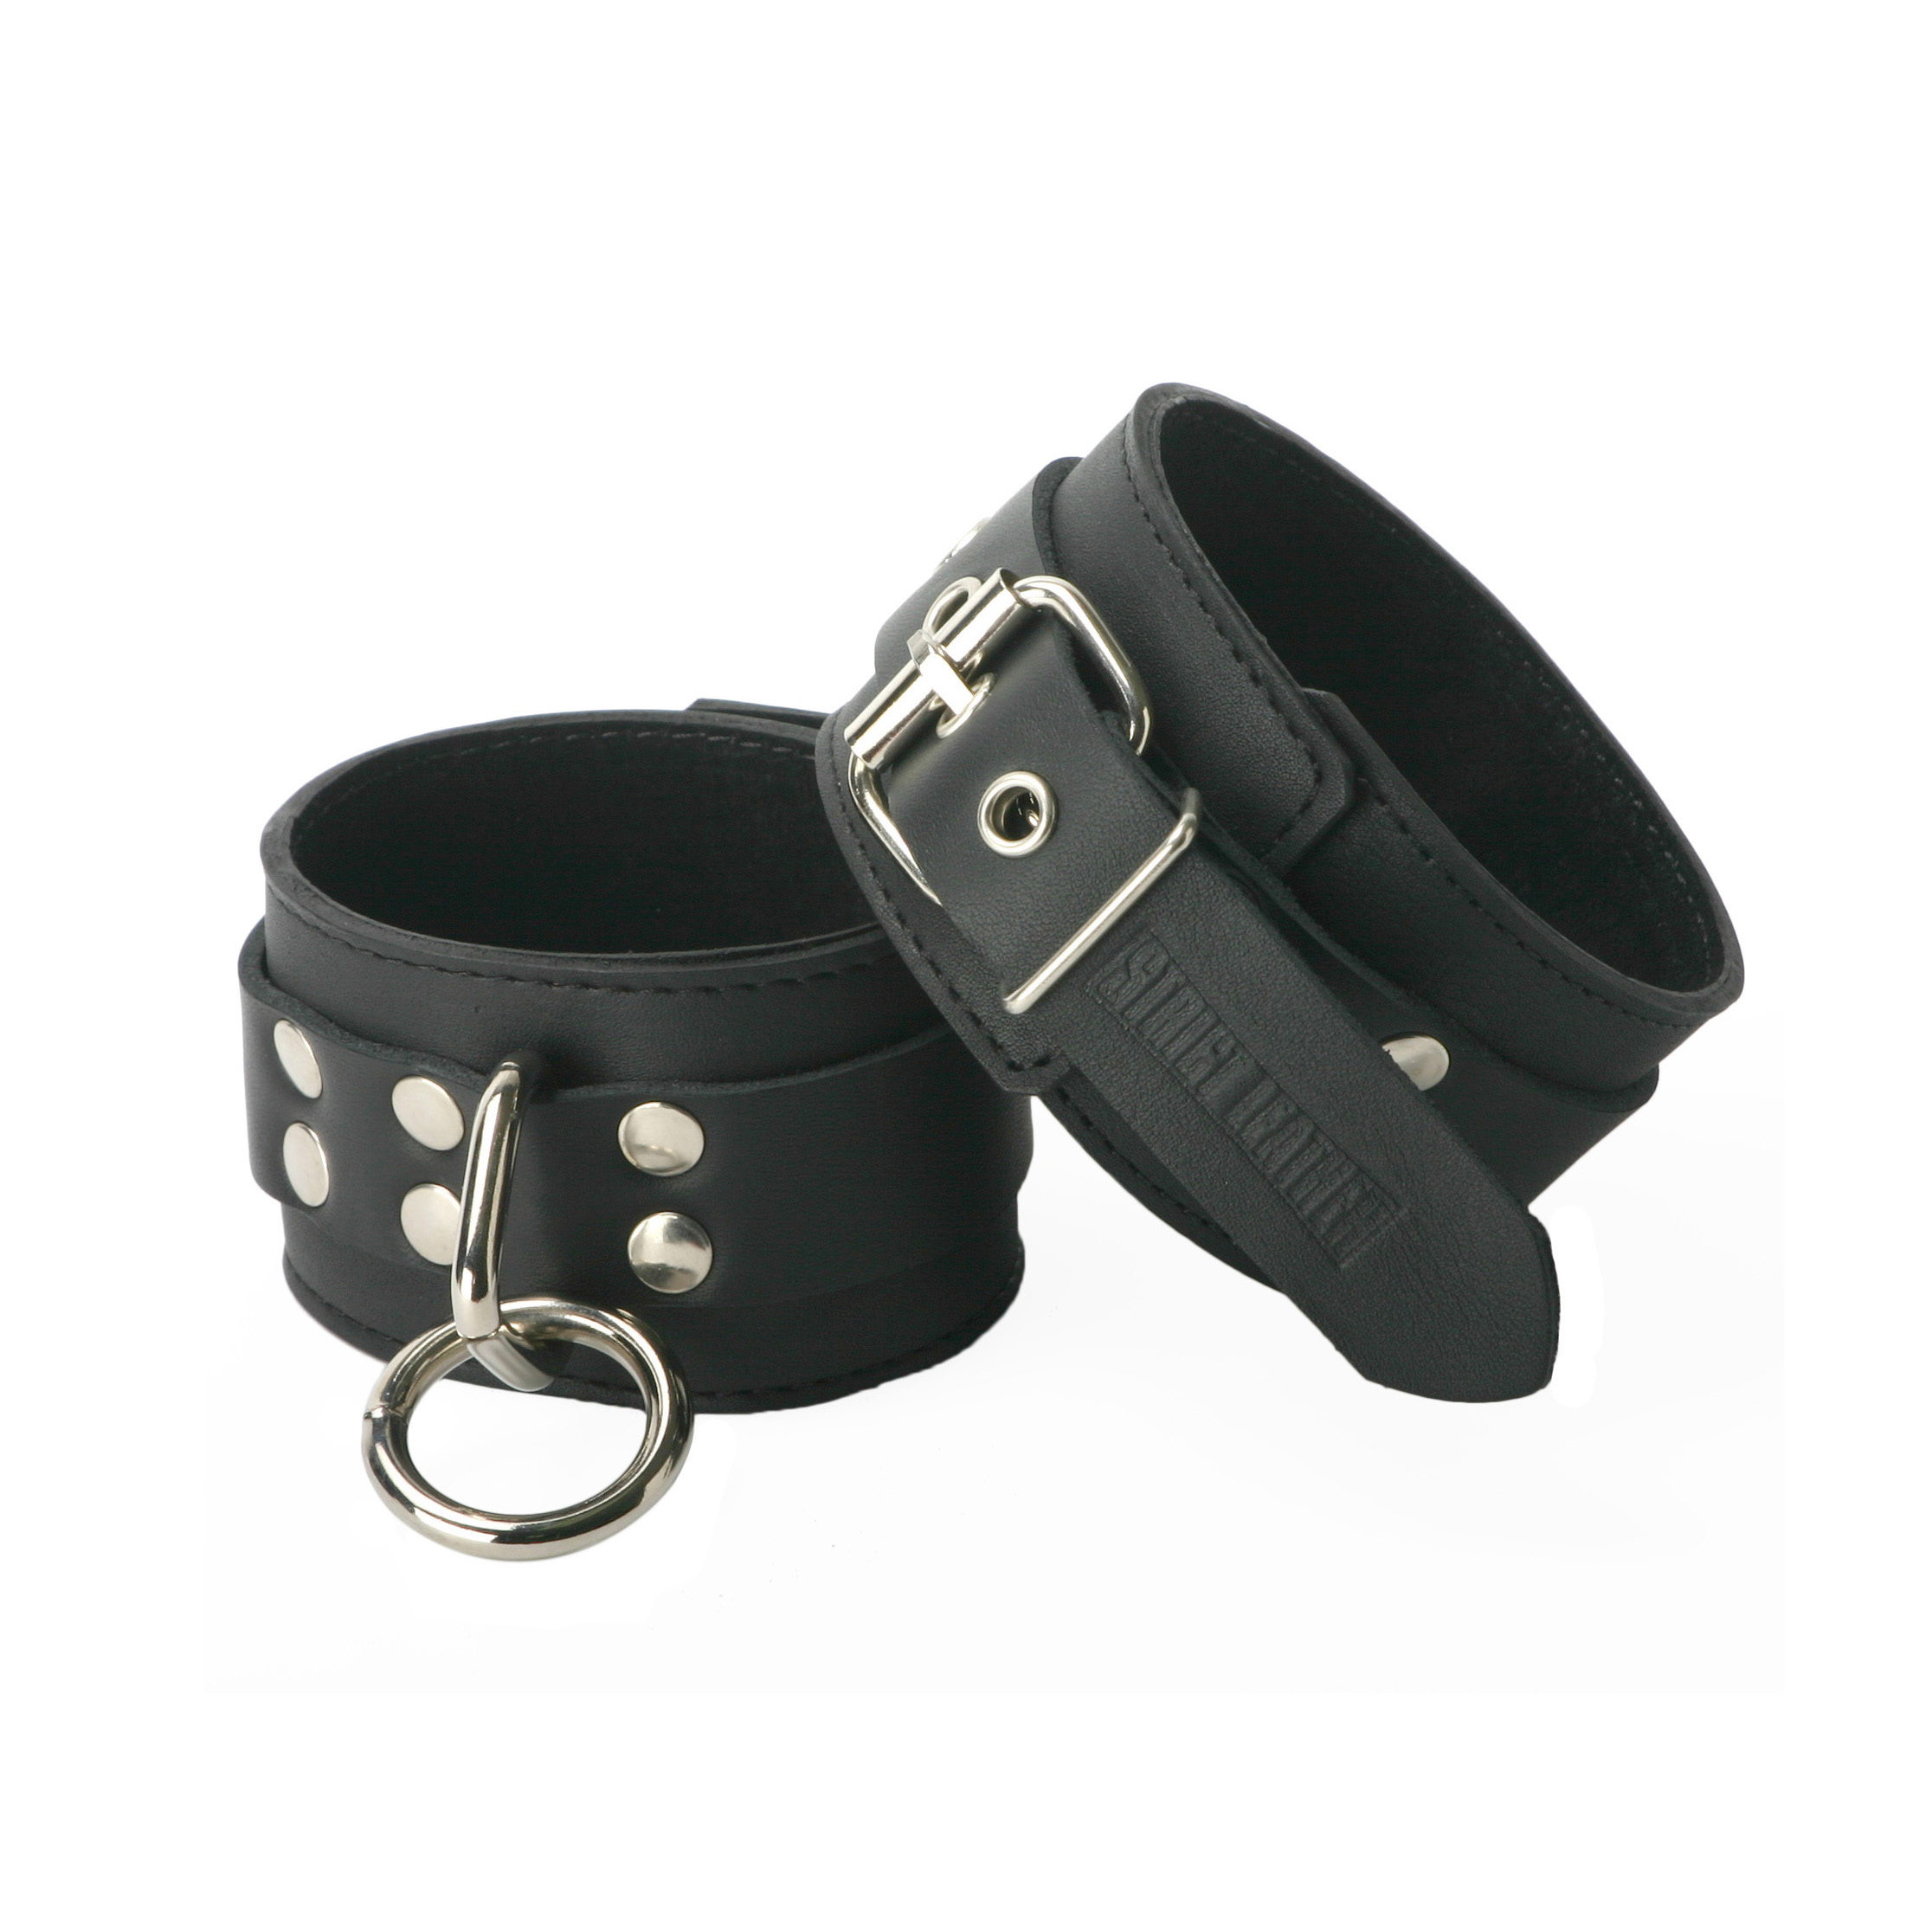 Strict+Leather+Suede+Lined+Wrist+Cuffs